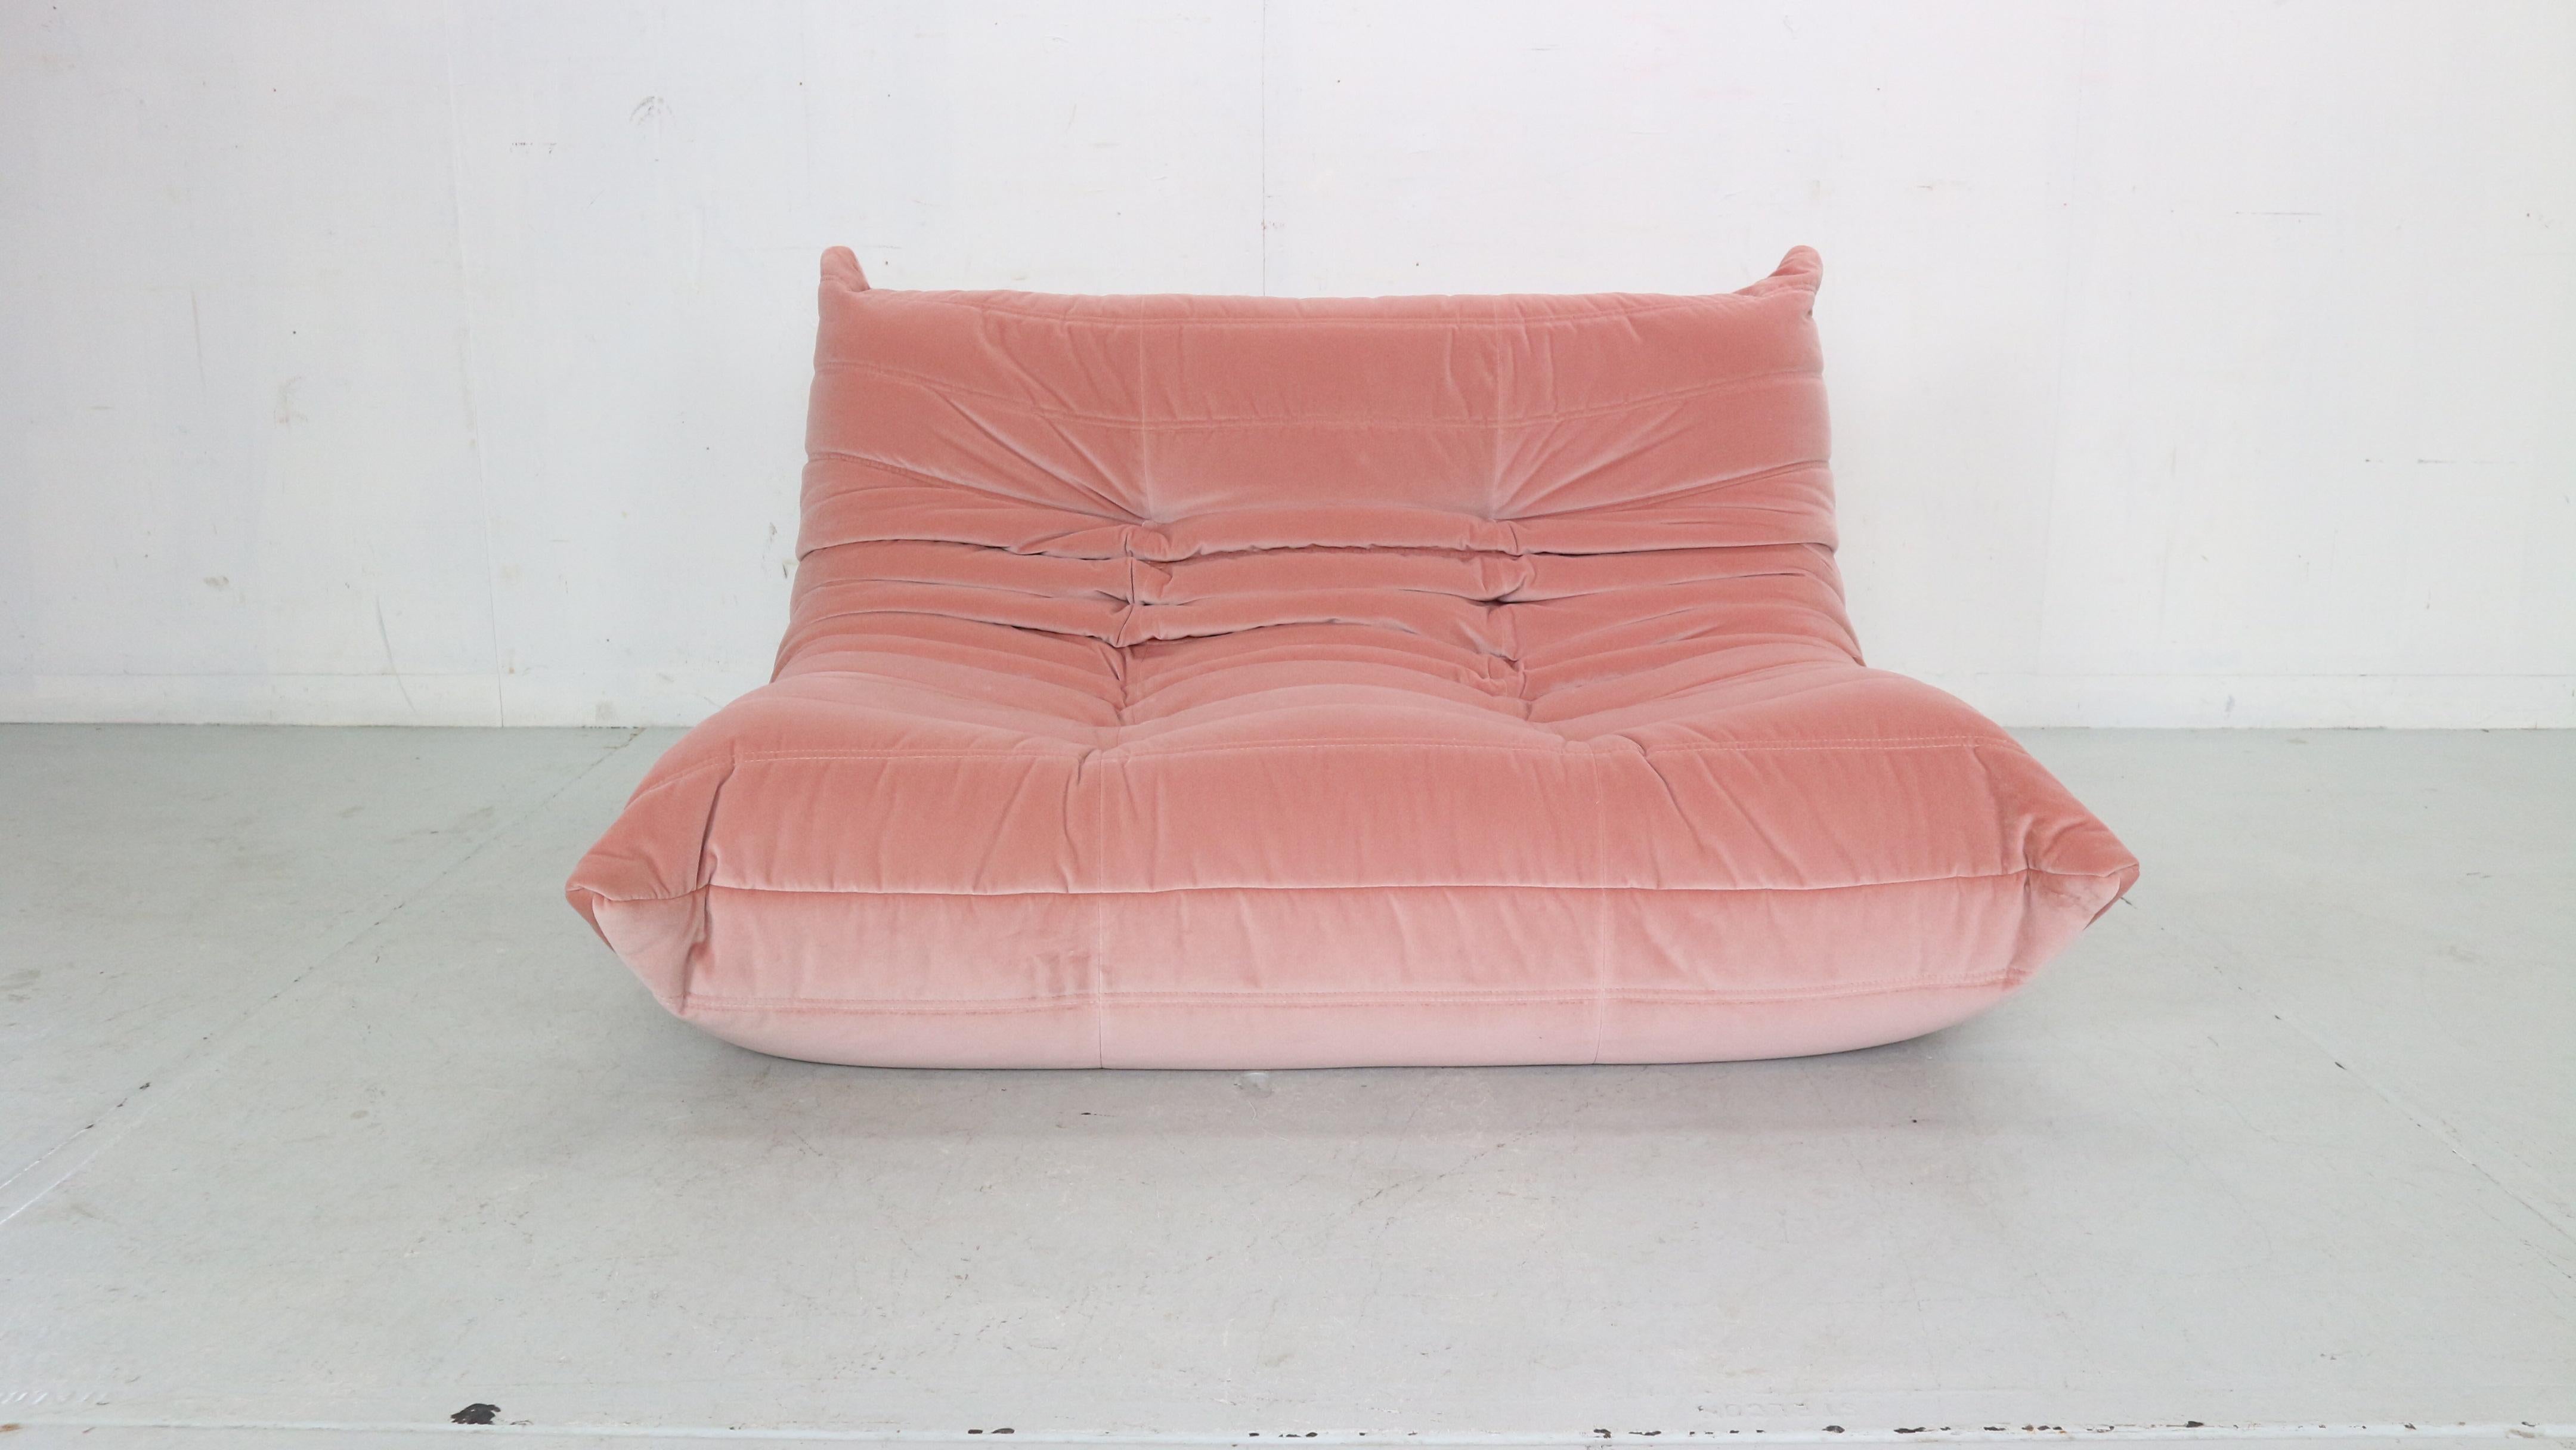 Magnificent Togo two seater lounge sofa designed by Michel Ducaroy in 1973 and was manufactured by Ligne Roset in France.

Very comfortable and beautiful accent to your living room space.
It has been newly reupholstered in light pink soft velvet